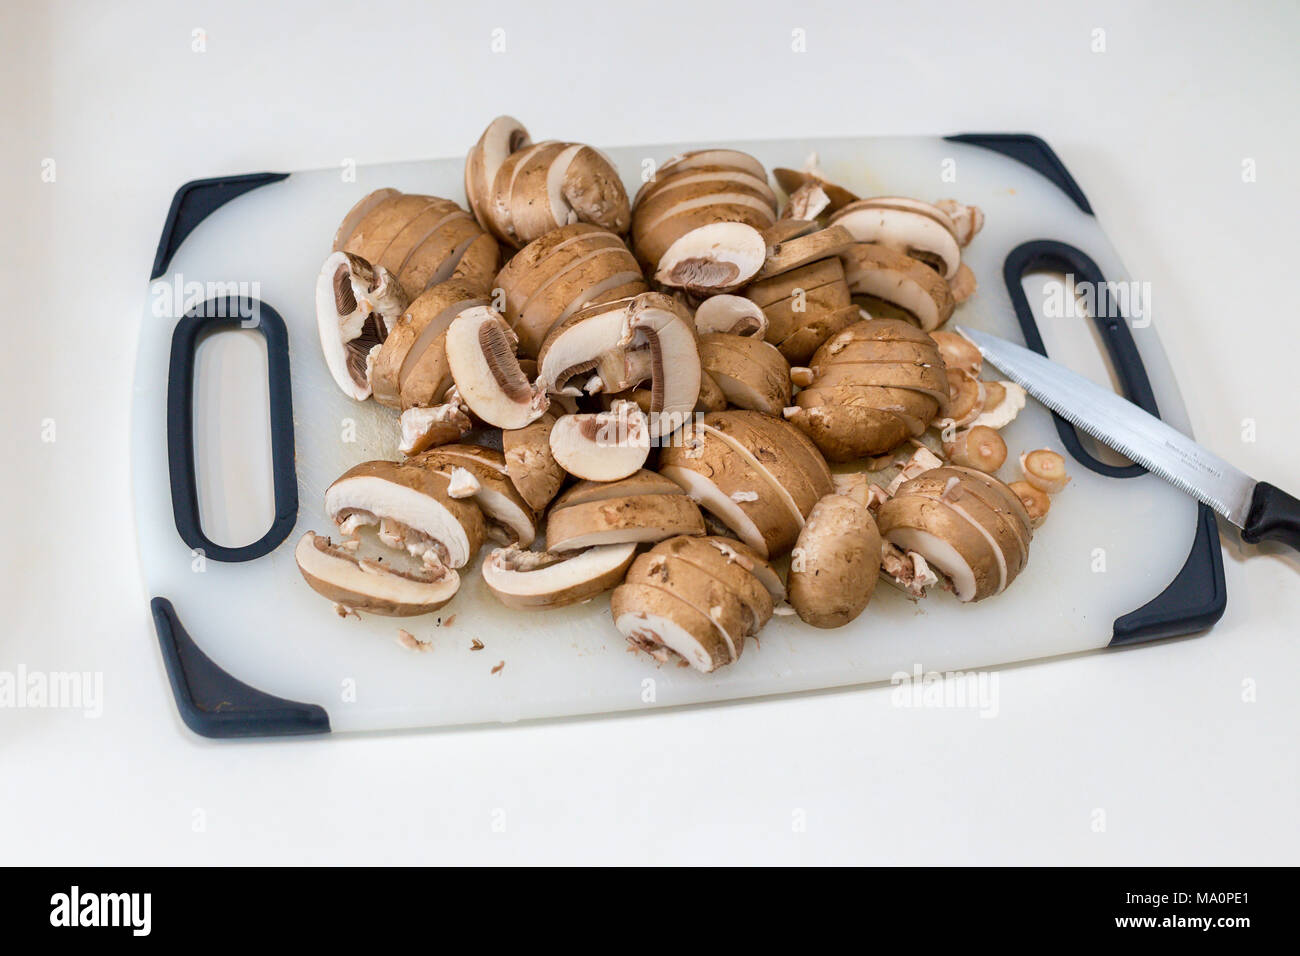 A pile of sliced chestnut mushrooms (Agaricus bisporus) on a white chopping board Stock Photo